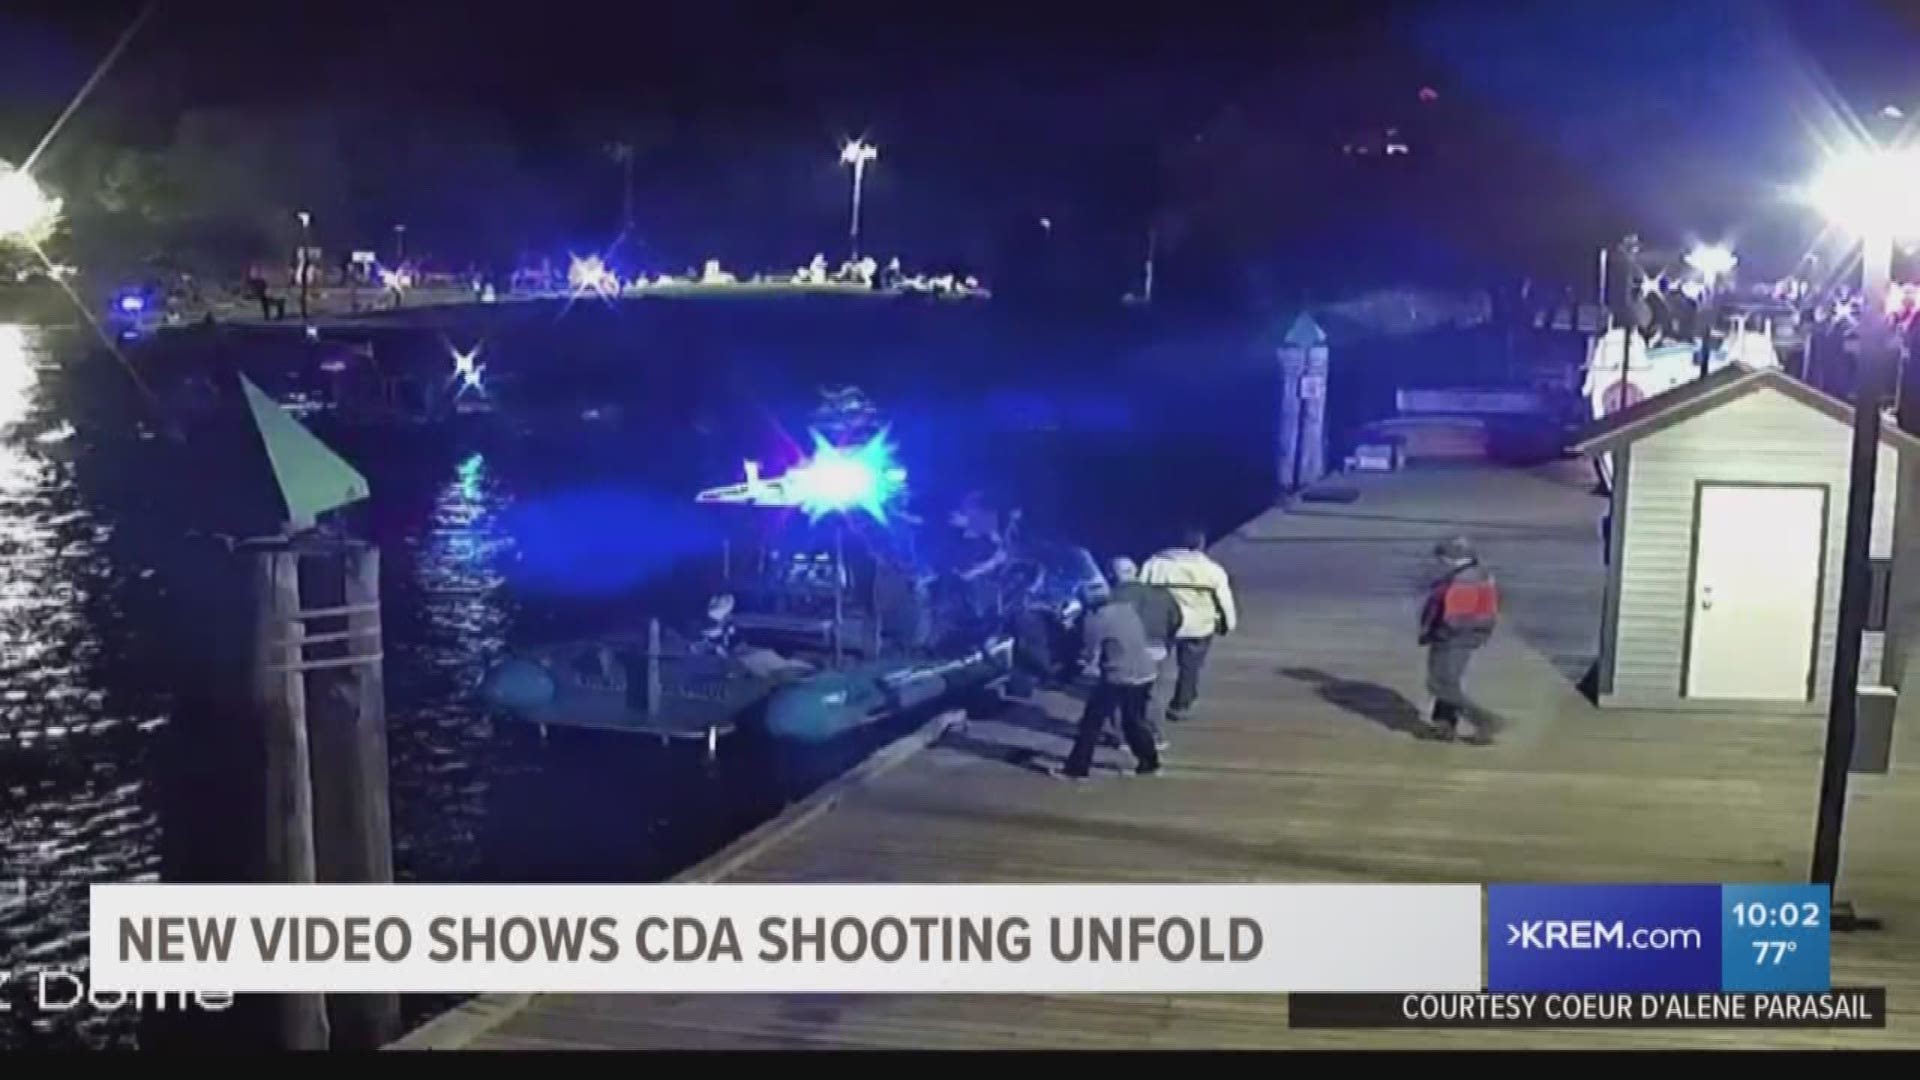 Video from from Coeur d'Alene Parasail, whose booth is located right on the pier shows a clear view of the shooting at Independence Point on July 4.